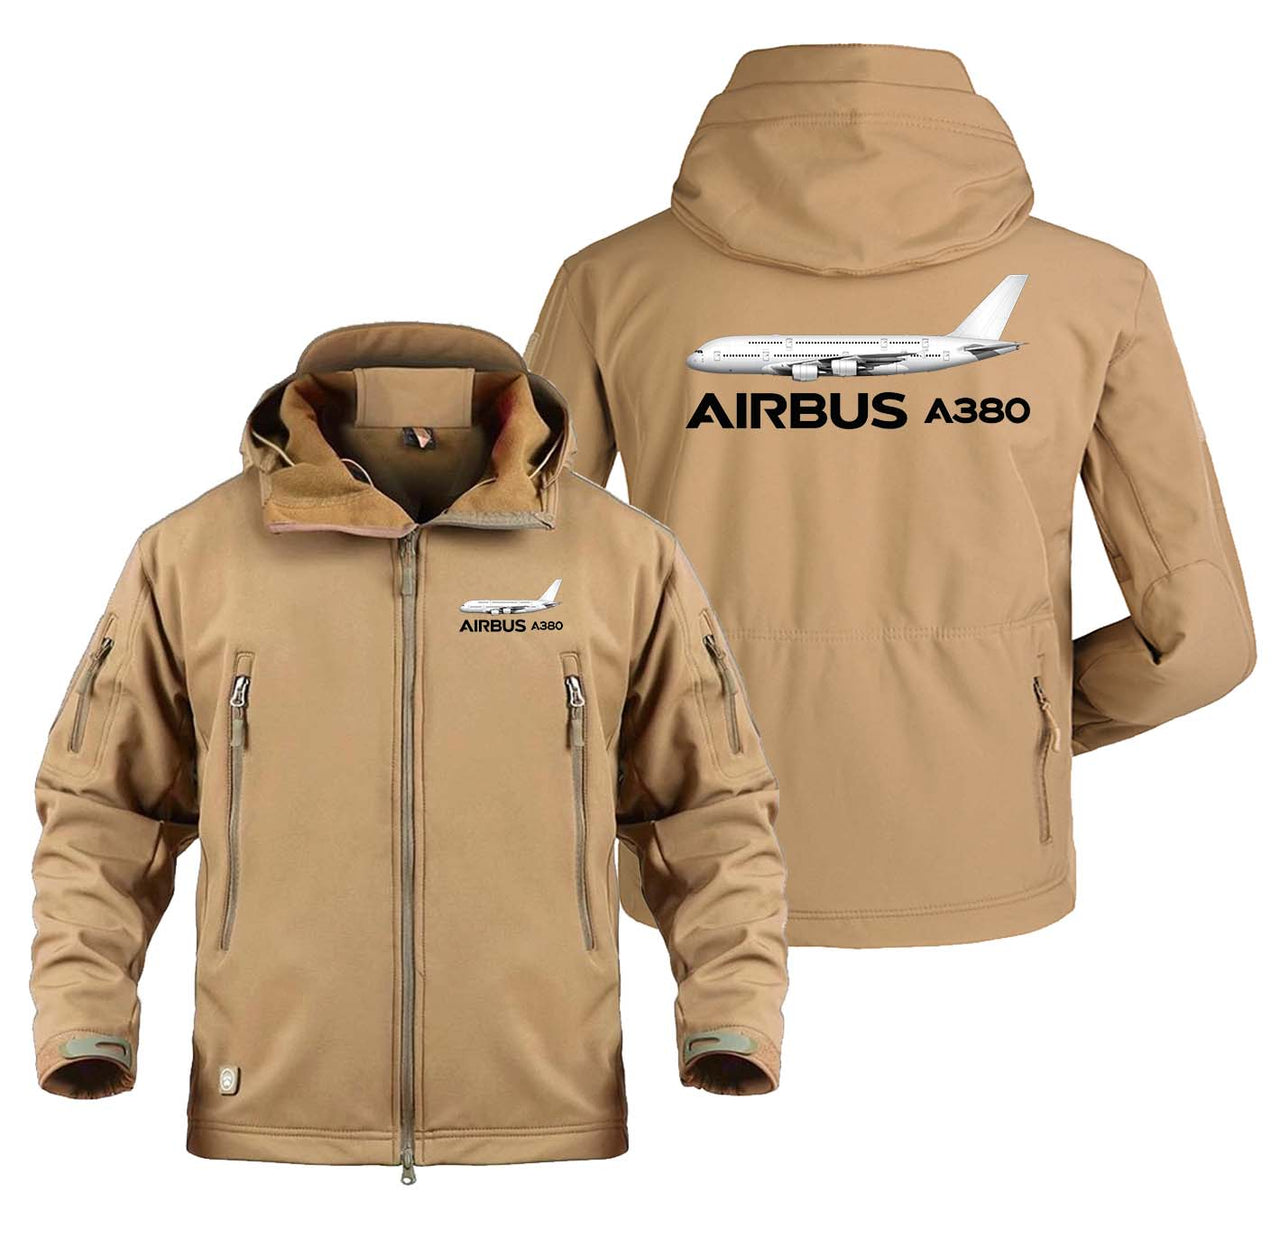 The Airbus A380 Designed Military Jackets (Customizable)